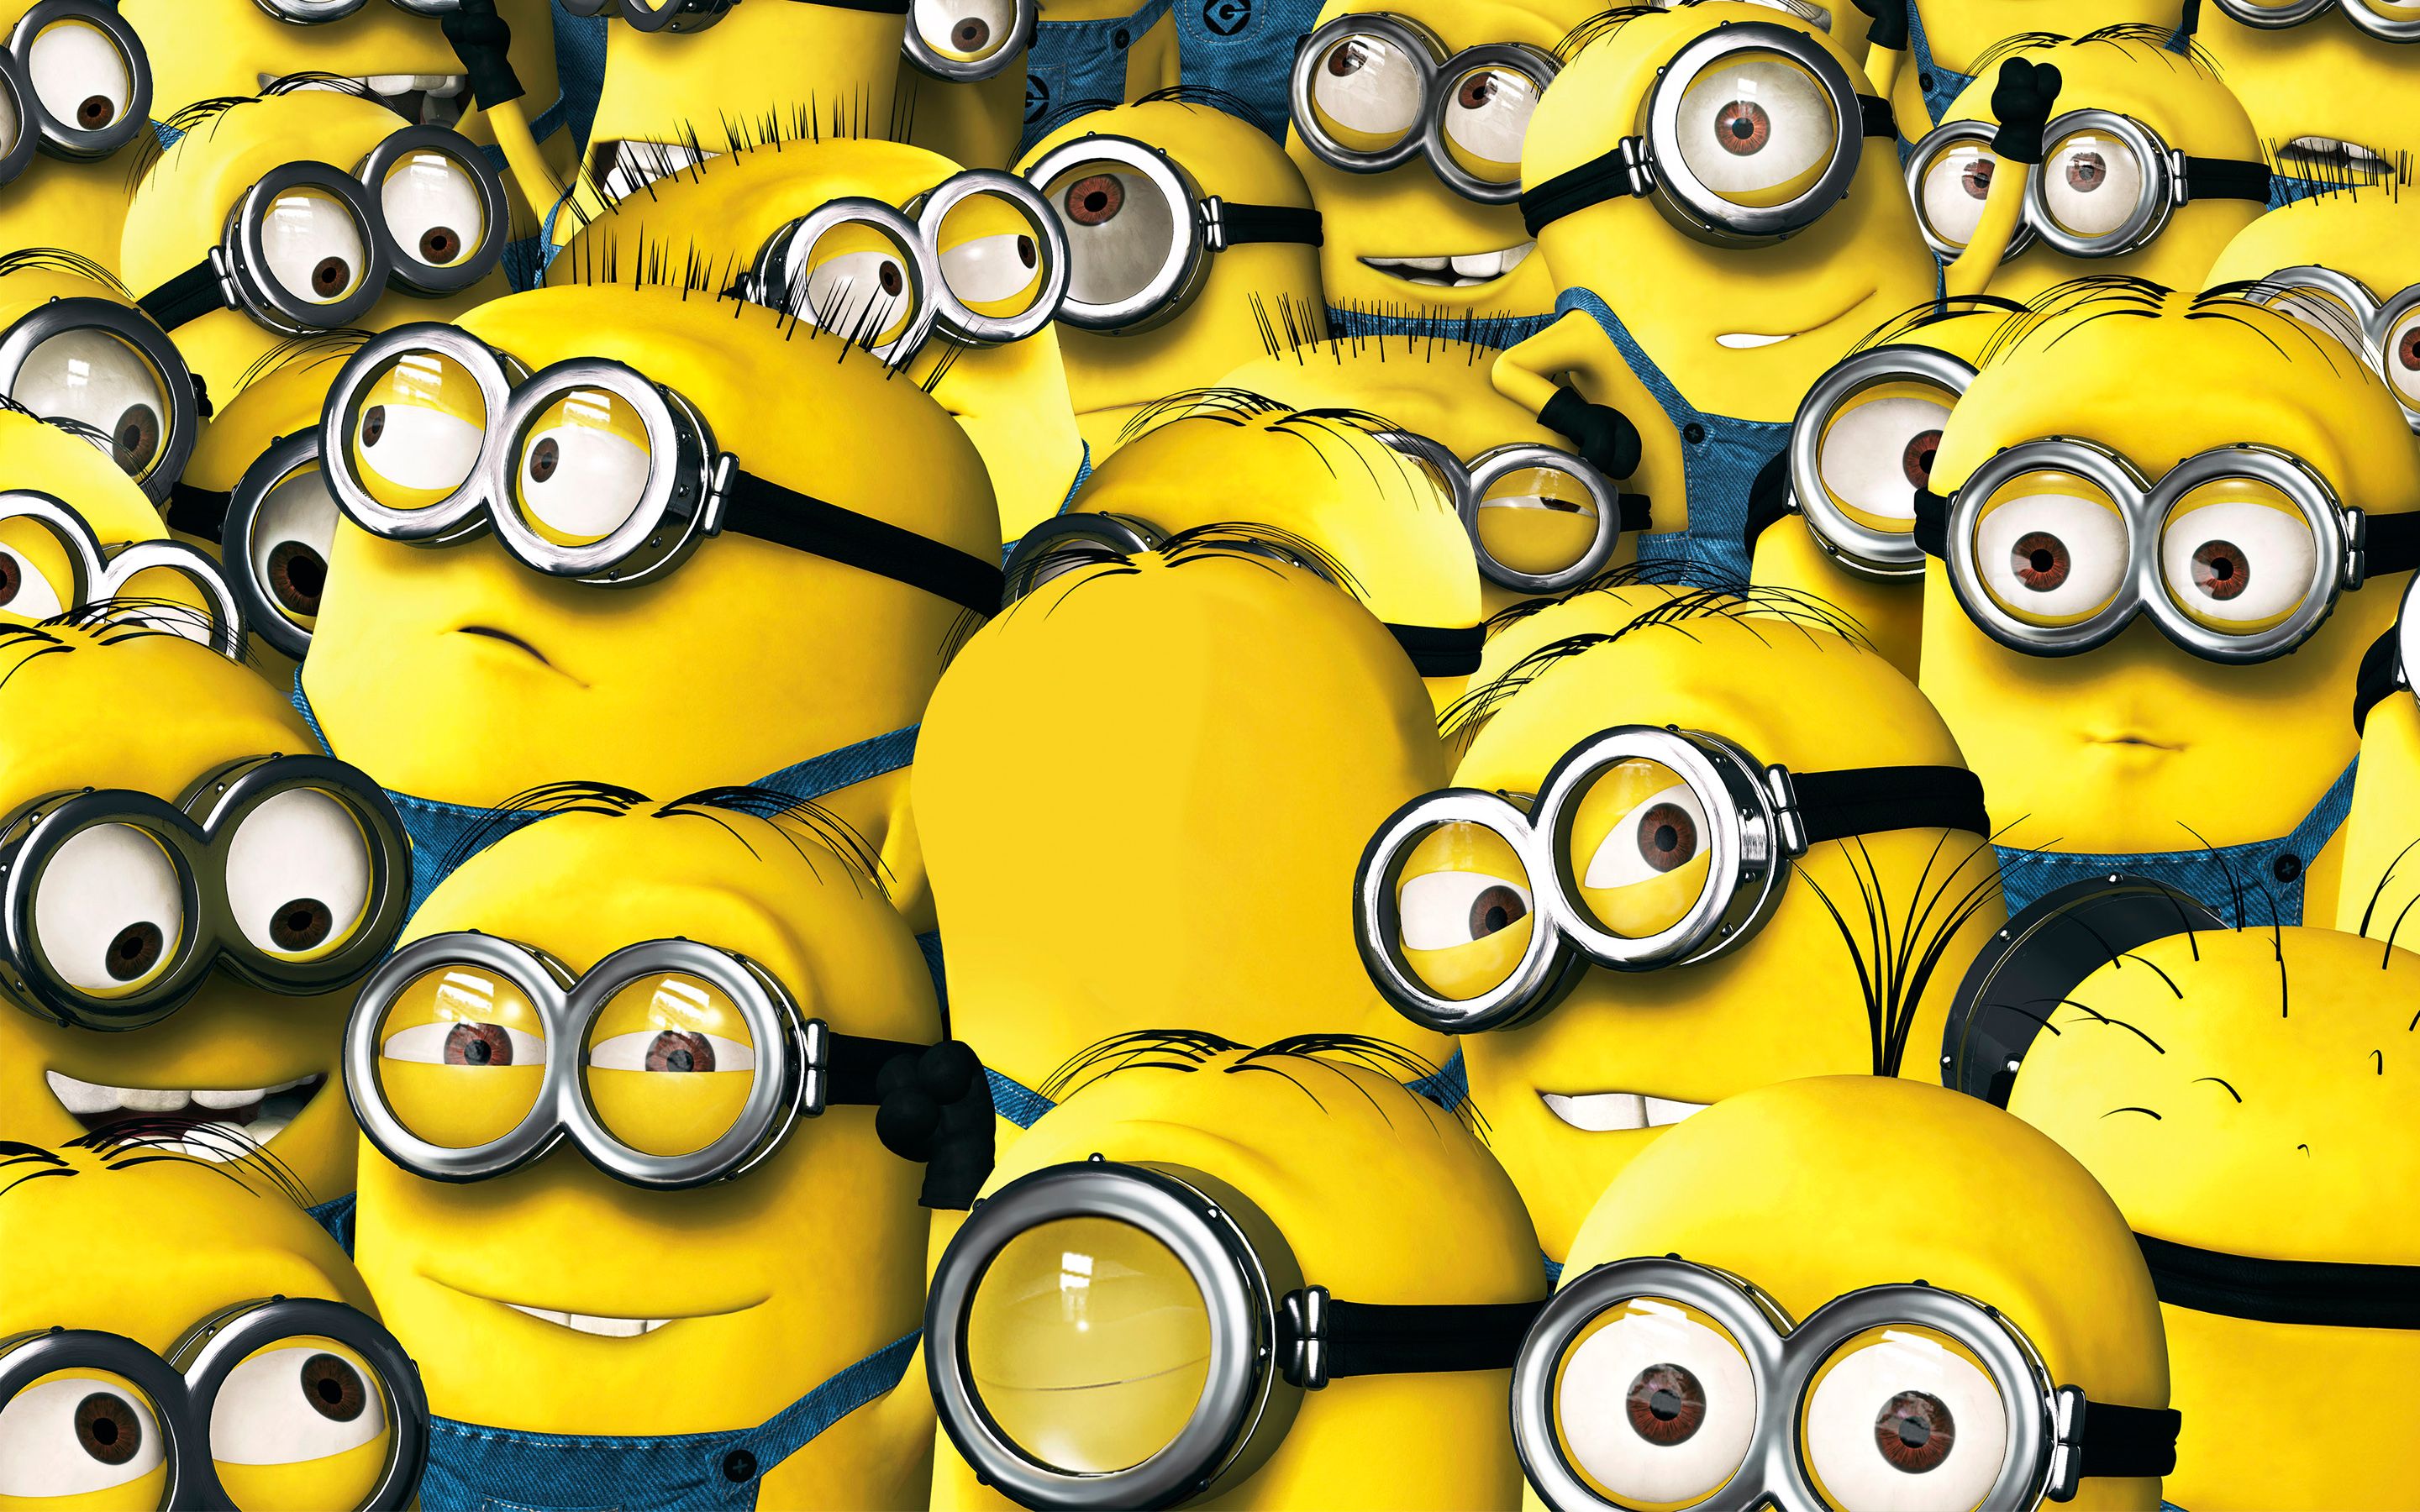 Despicable 4K wallpaper for your desktop or mobile screen free and easy to download